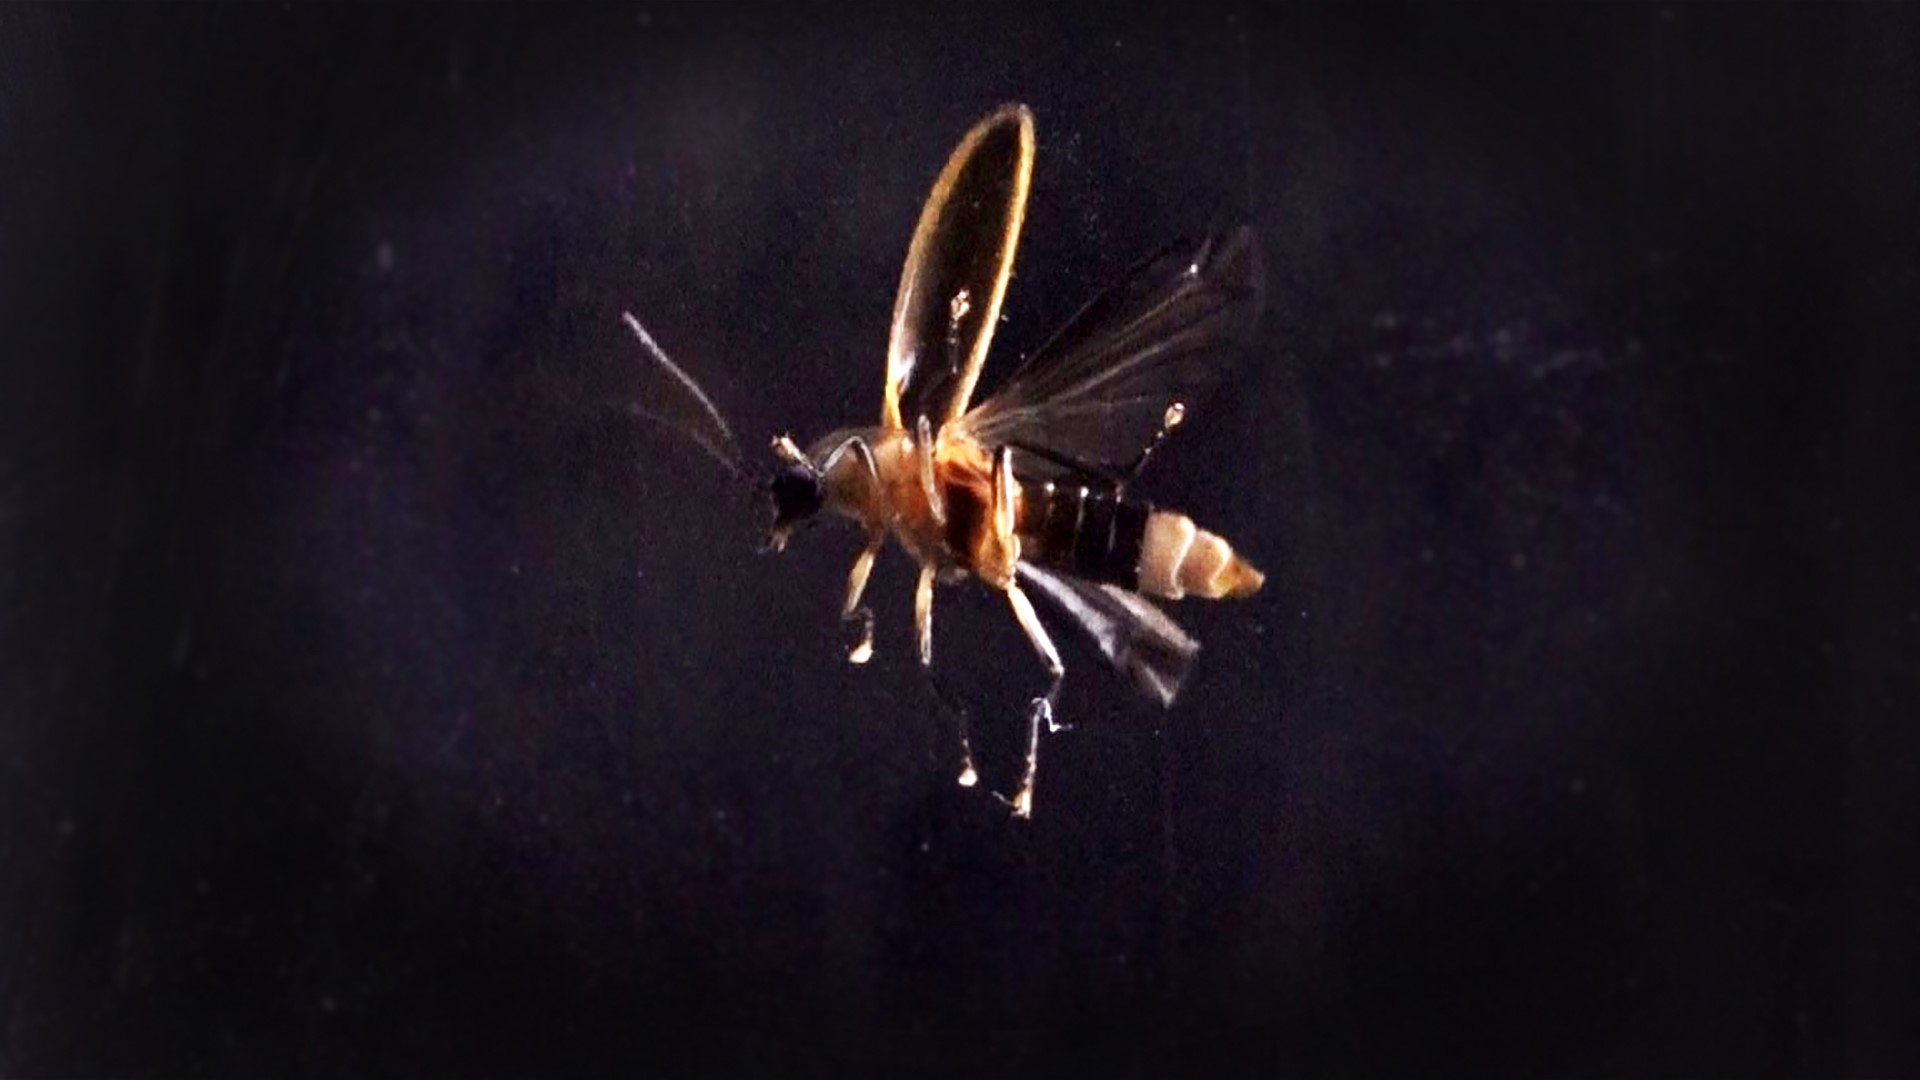 Jun. 14, 2018: A Corryton man is opening his private property to the public to see the "snappy sync" species of synchronous firefly. The event was partly inspired by the good nature of his late-wife.